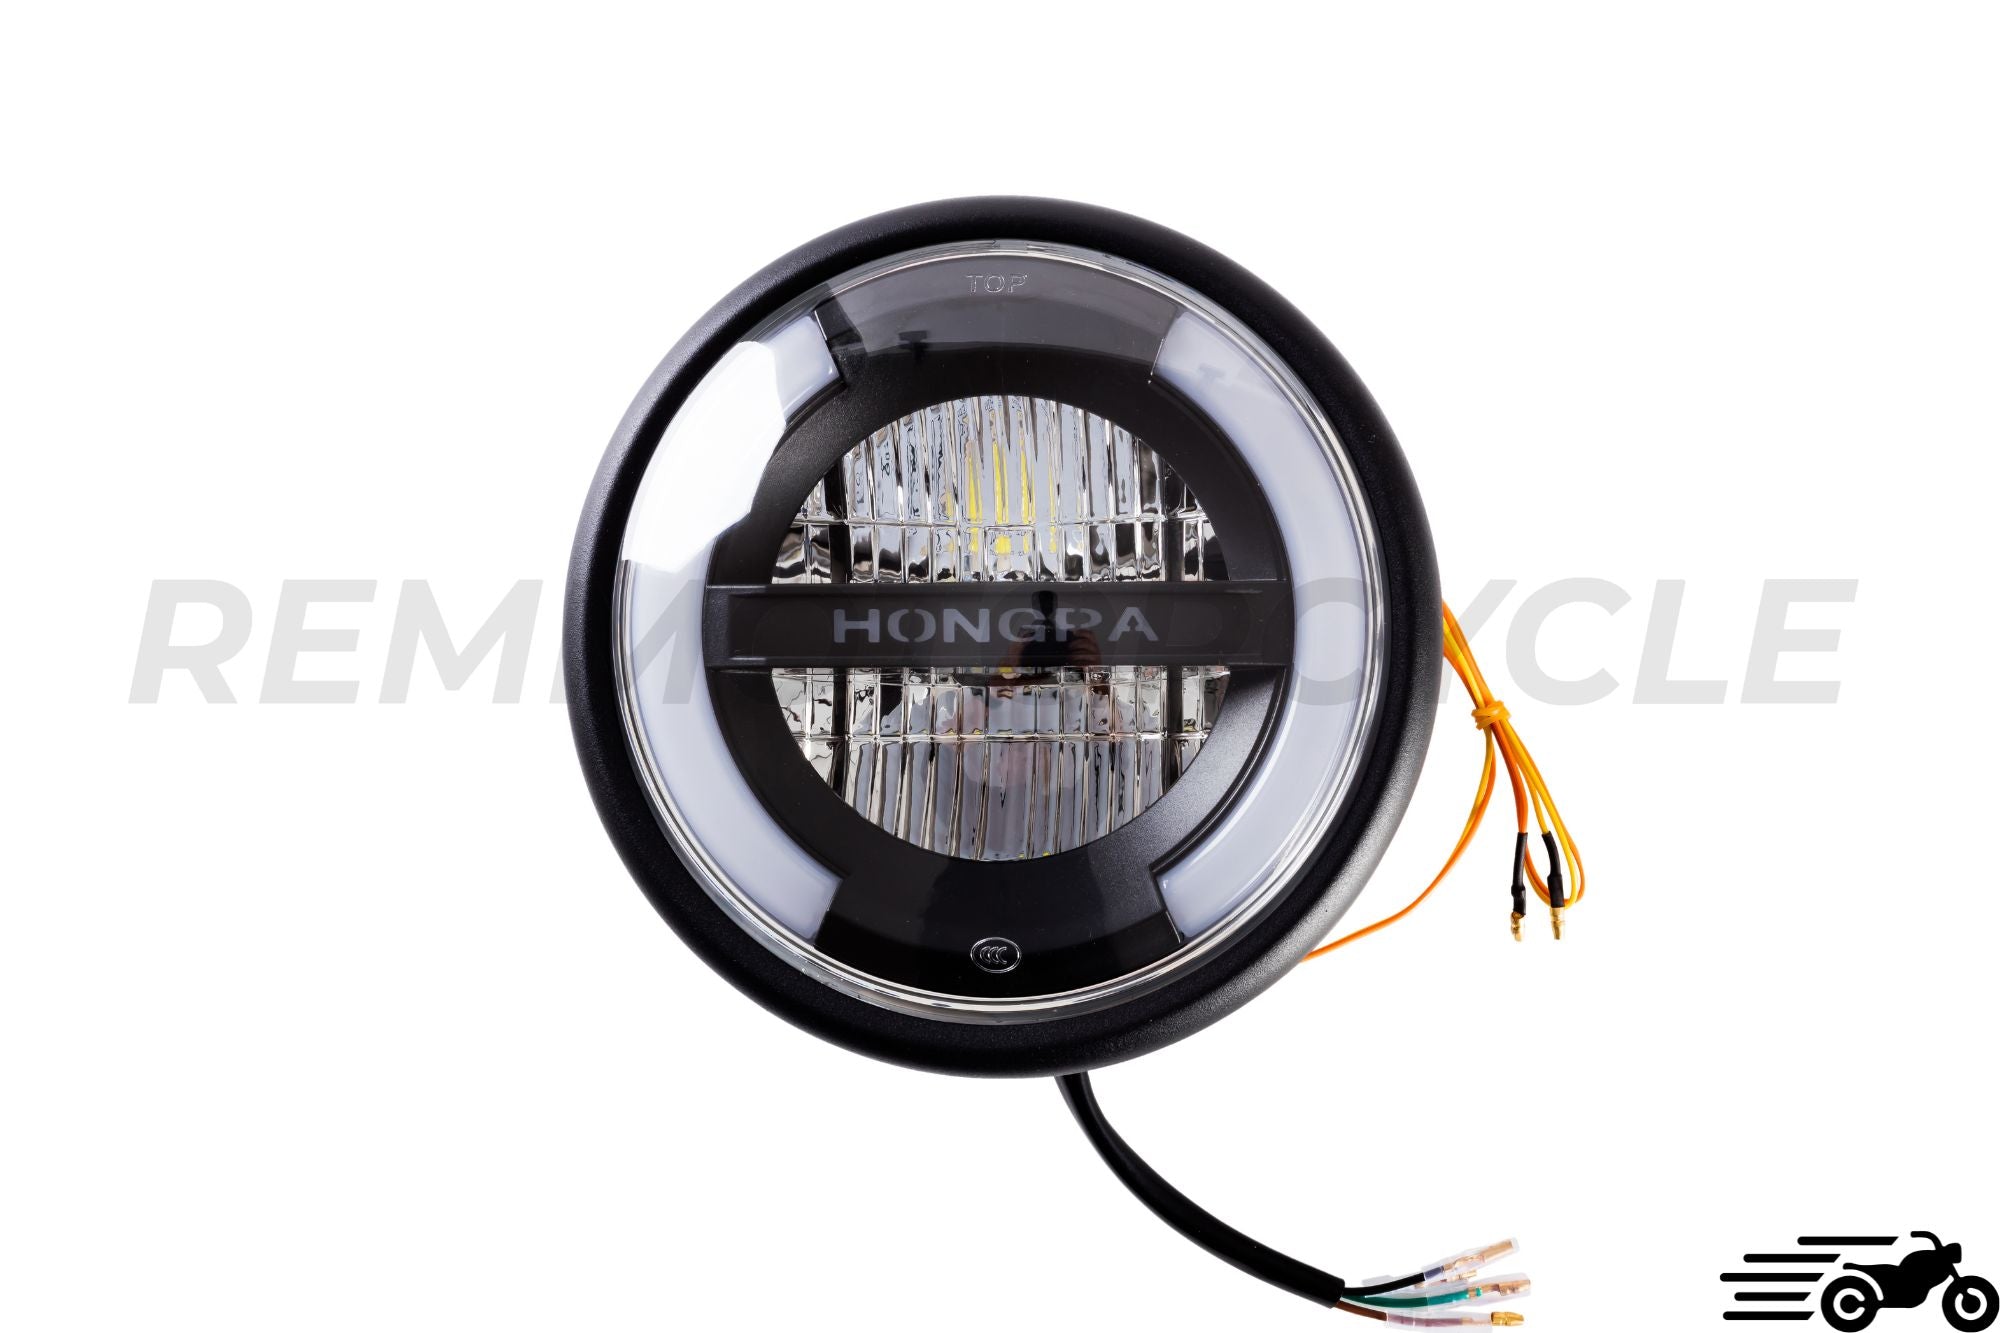 Front LED headlight with scrolling indicators